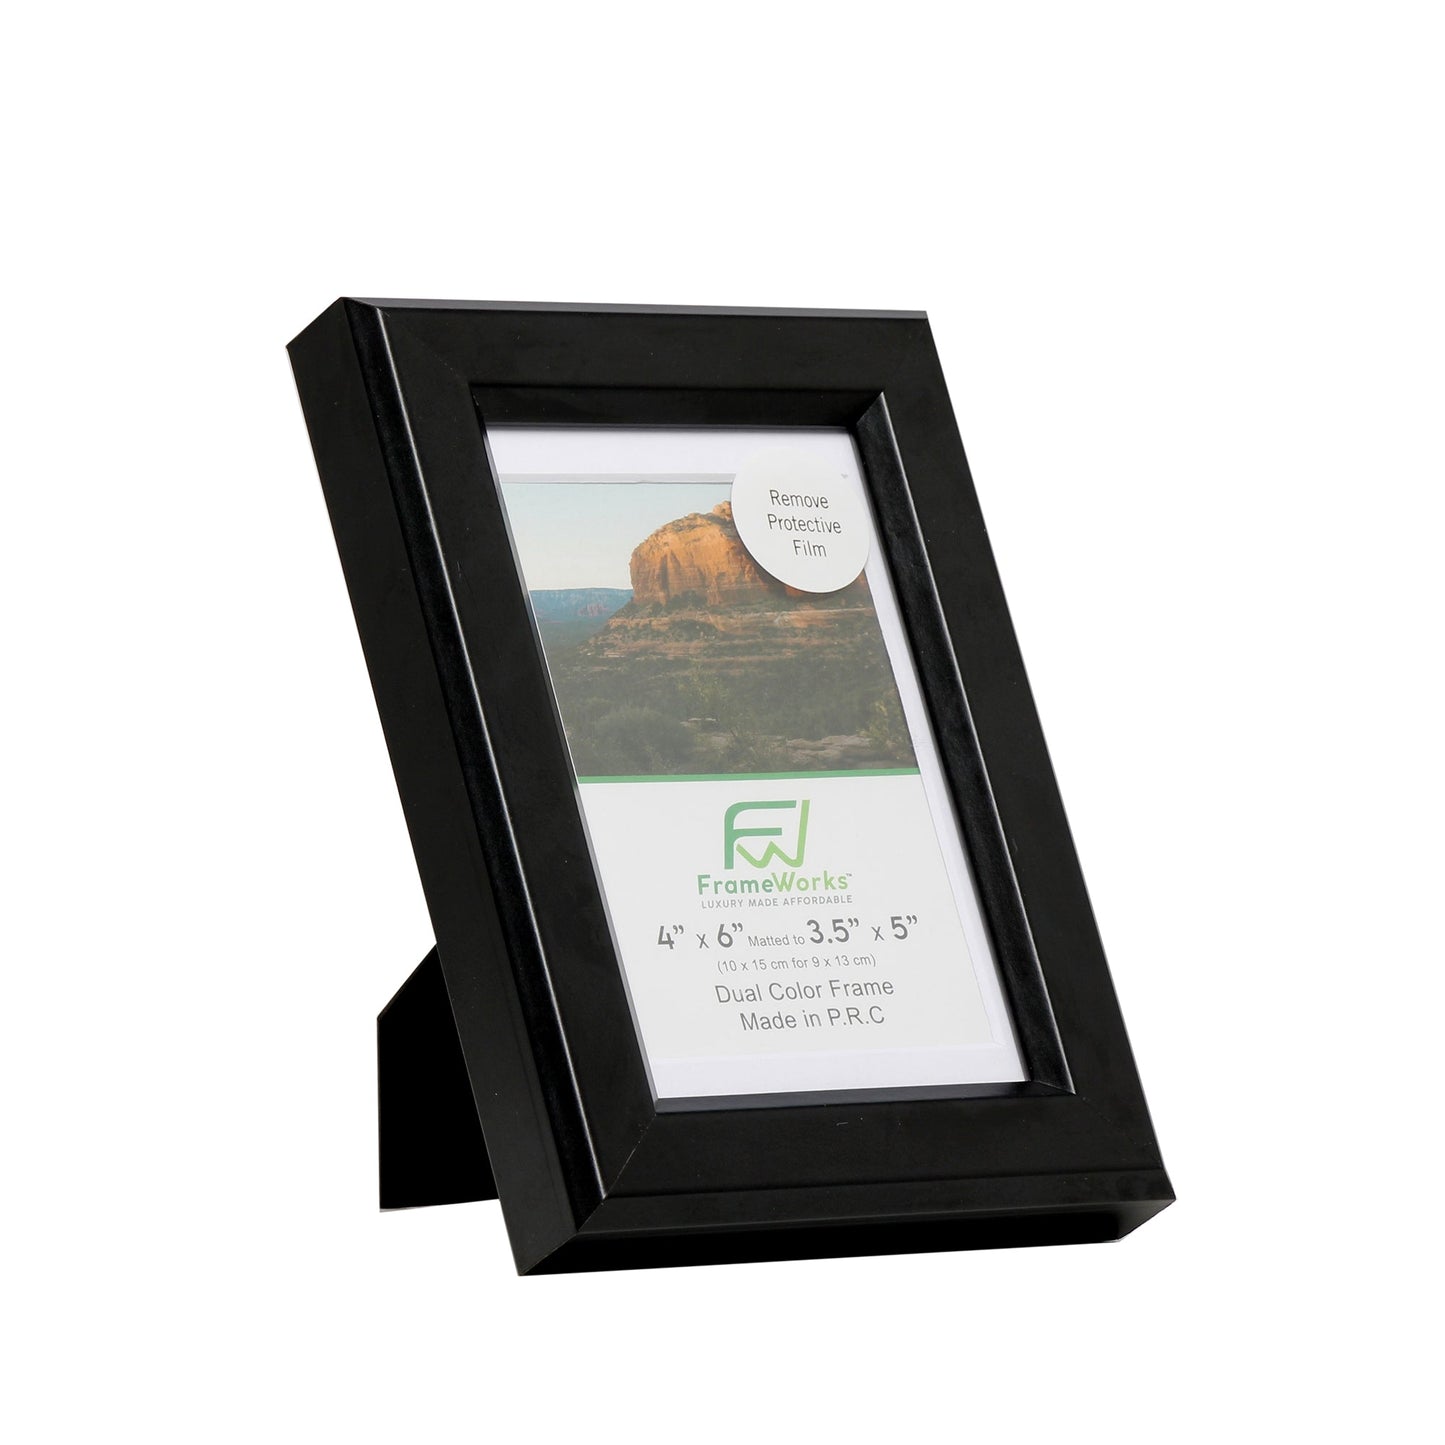 4" x 6" Black Wood 2-Pack Gunnabo Picture Frames, 3.5" x 5" Matted